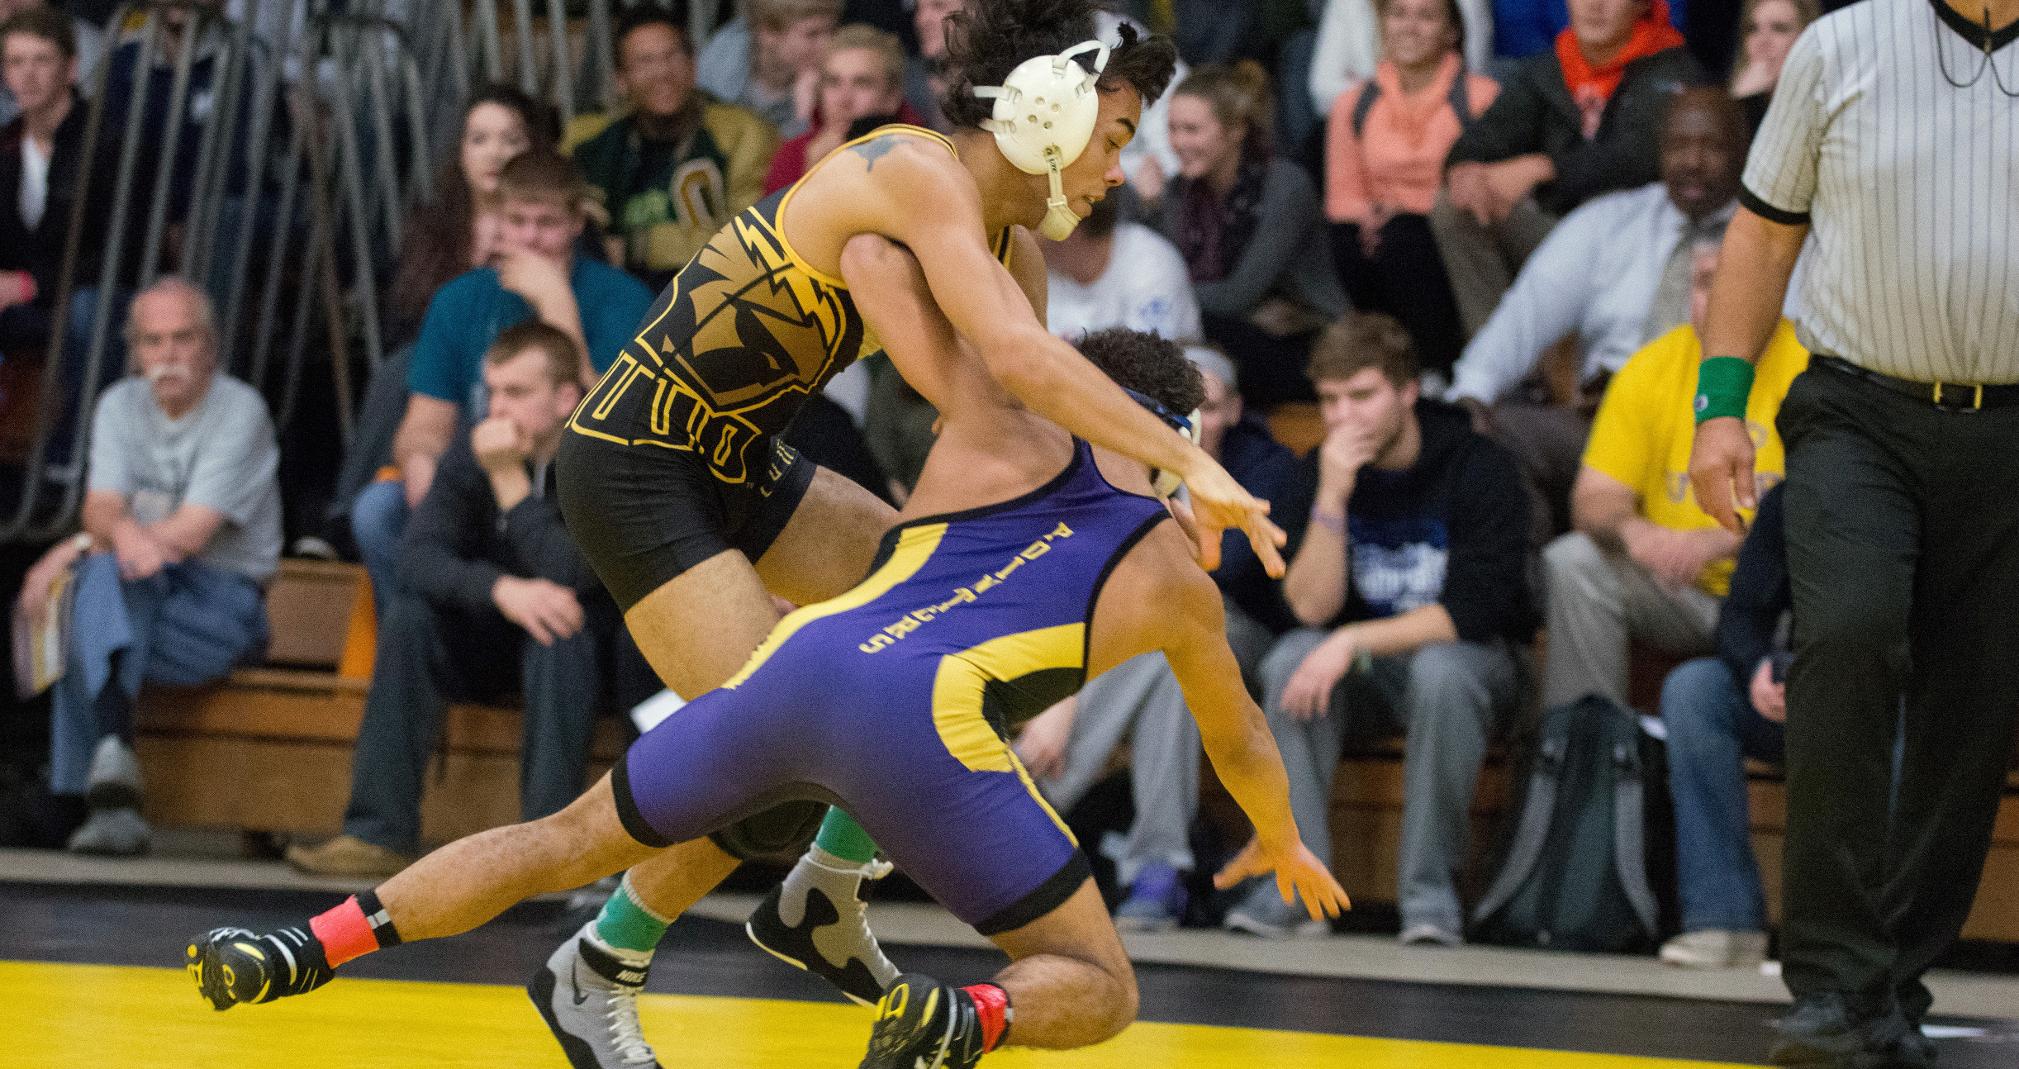 Jonathan Flores recorded UW-Oshkosh's first victory of the match with his pin of Moriah Clark in 4:49.